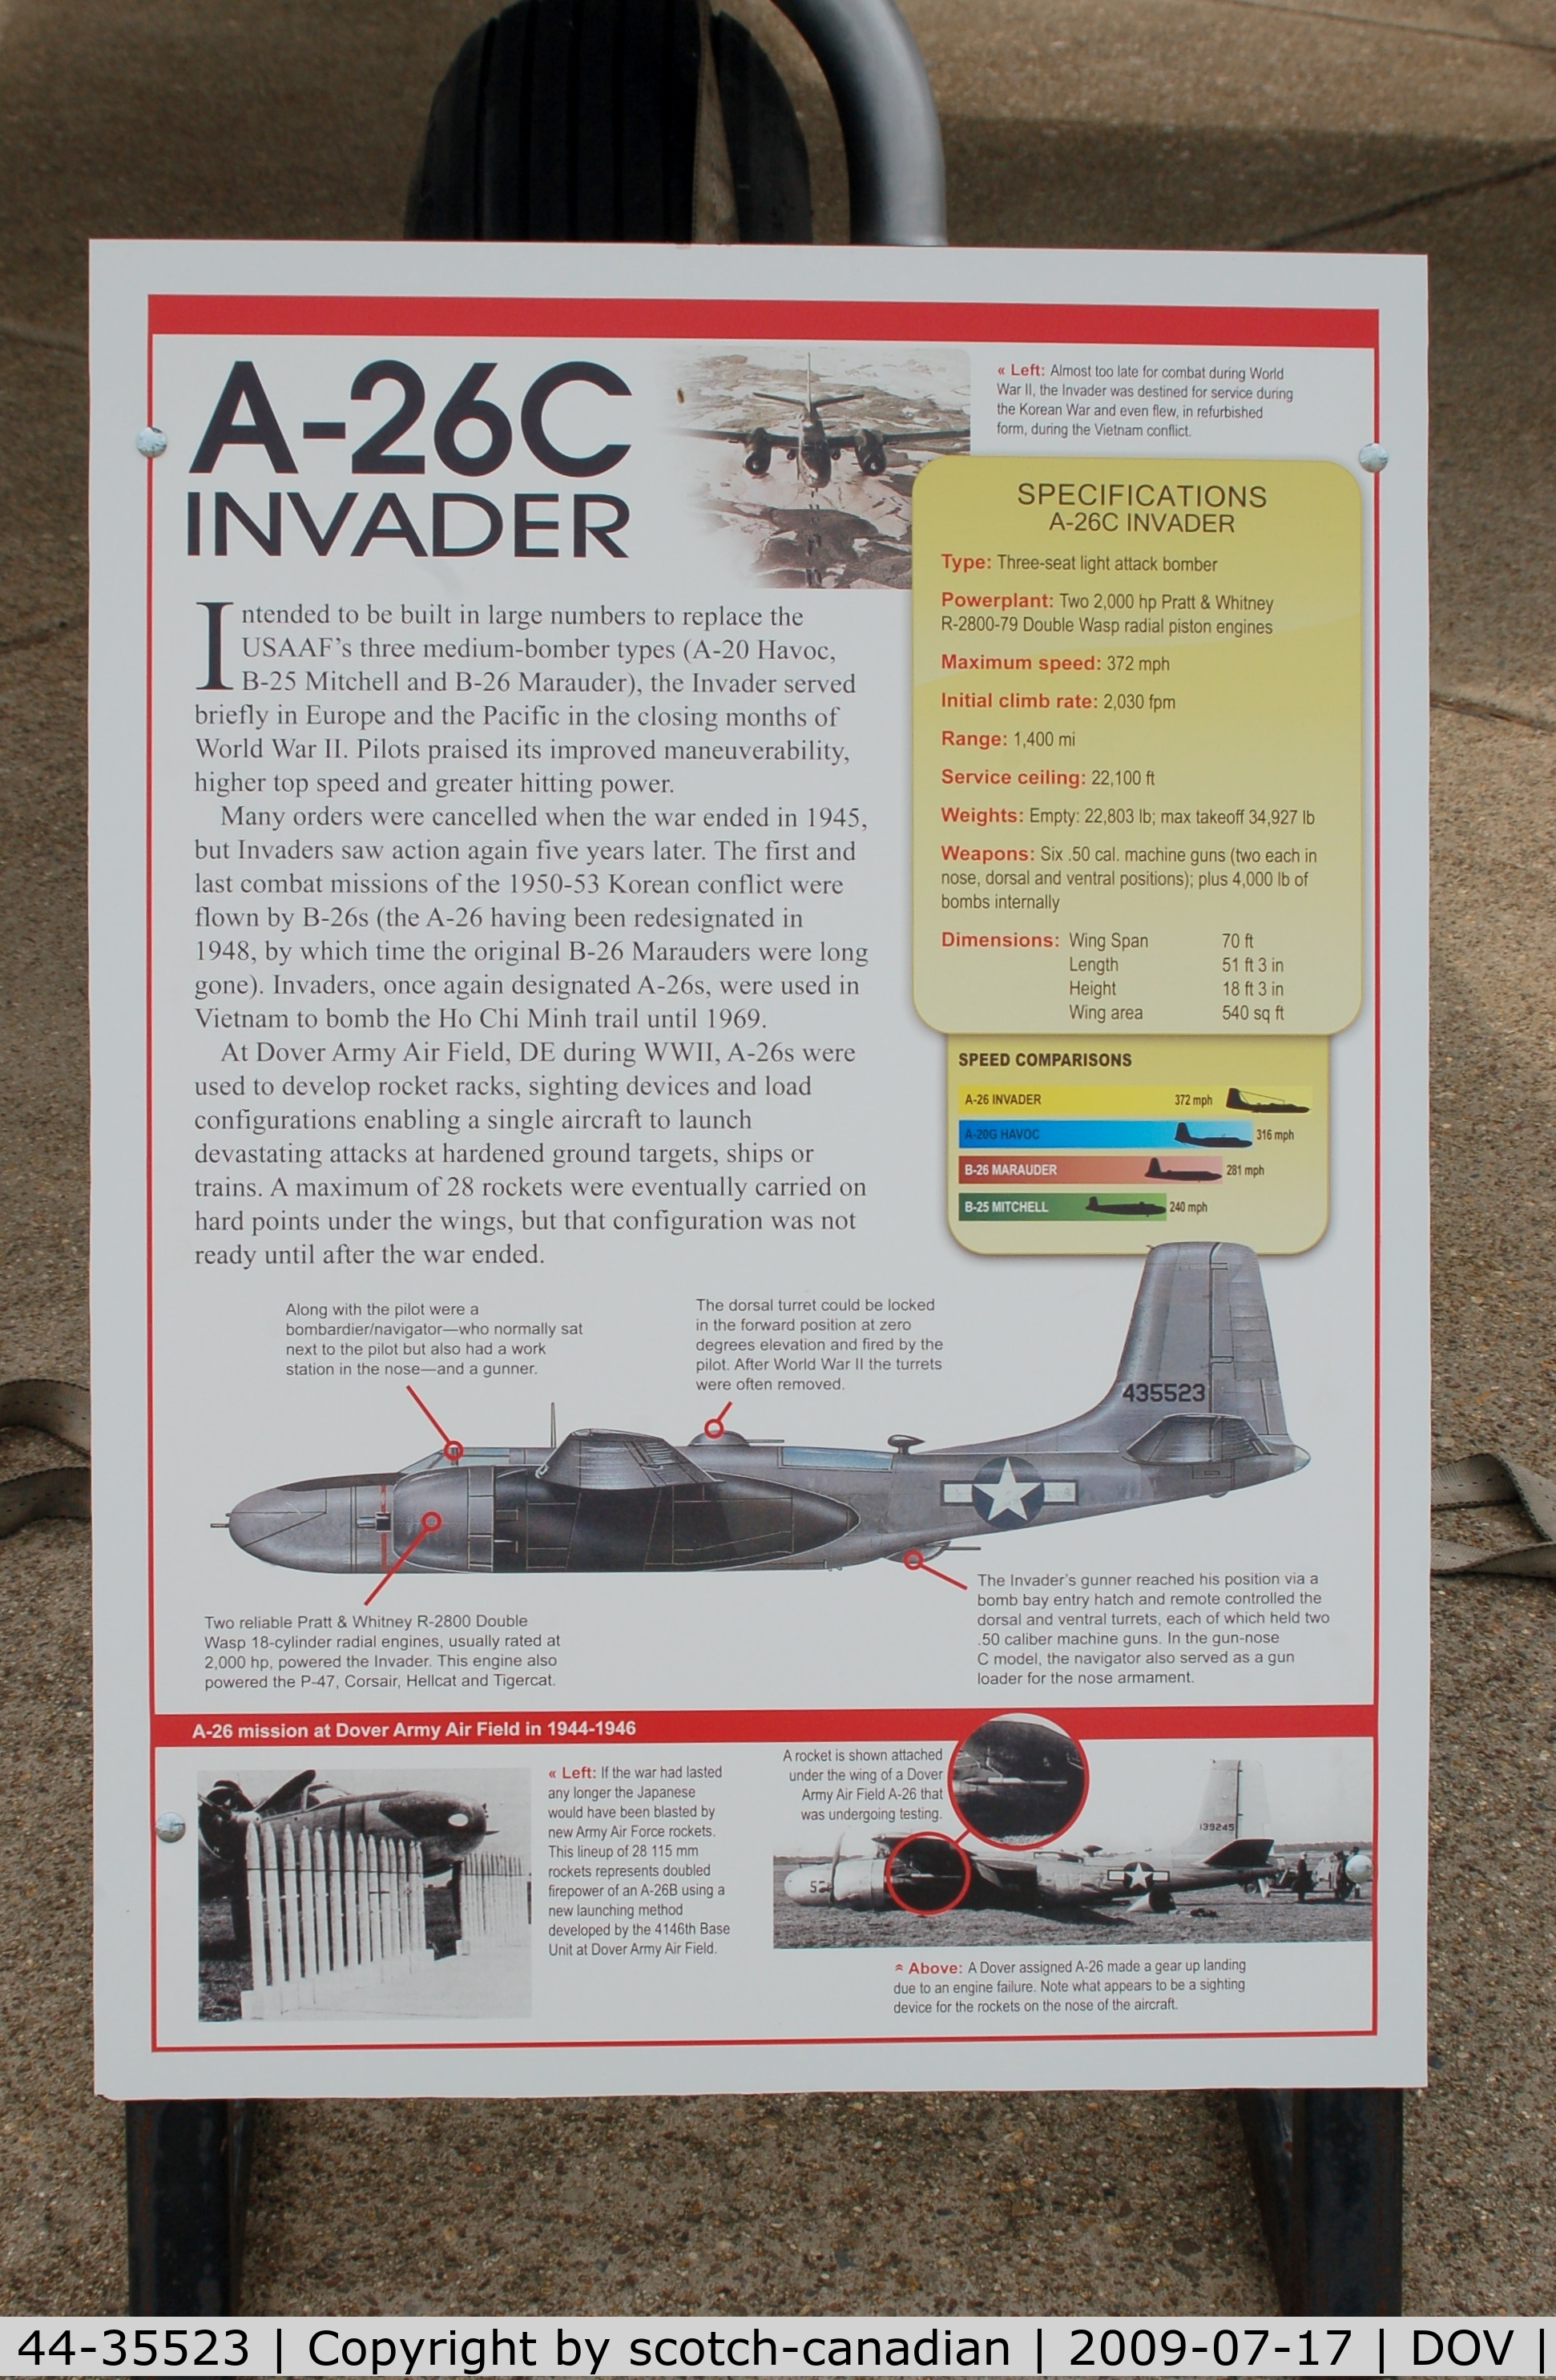 44-35523, 1944 Douglas A-26C Invader C/N 28802, Information Plaque for the 1944 Douglas A-26C Invader at the Air Mobility Command Museum, Dover AFB, DE